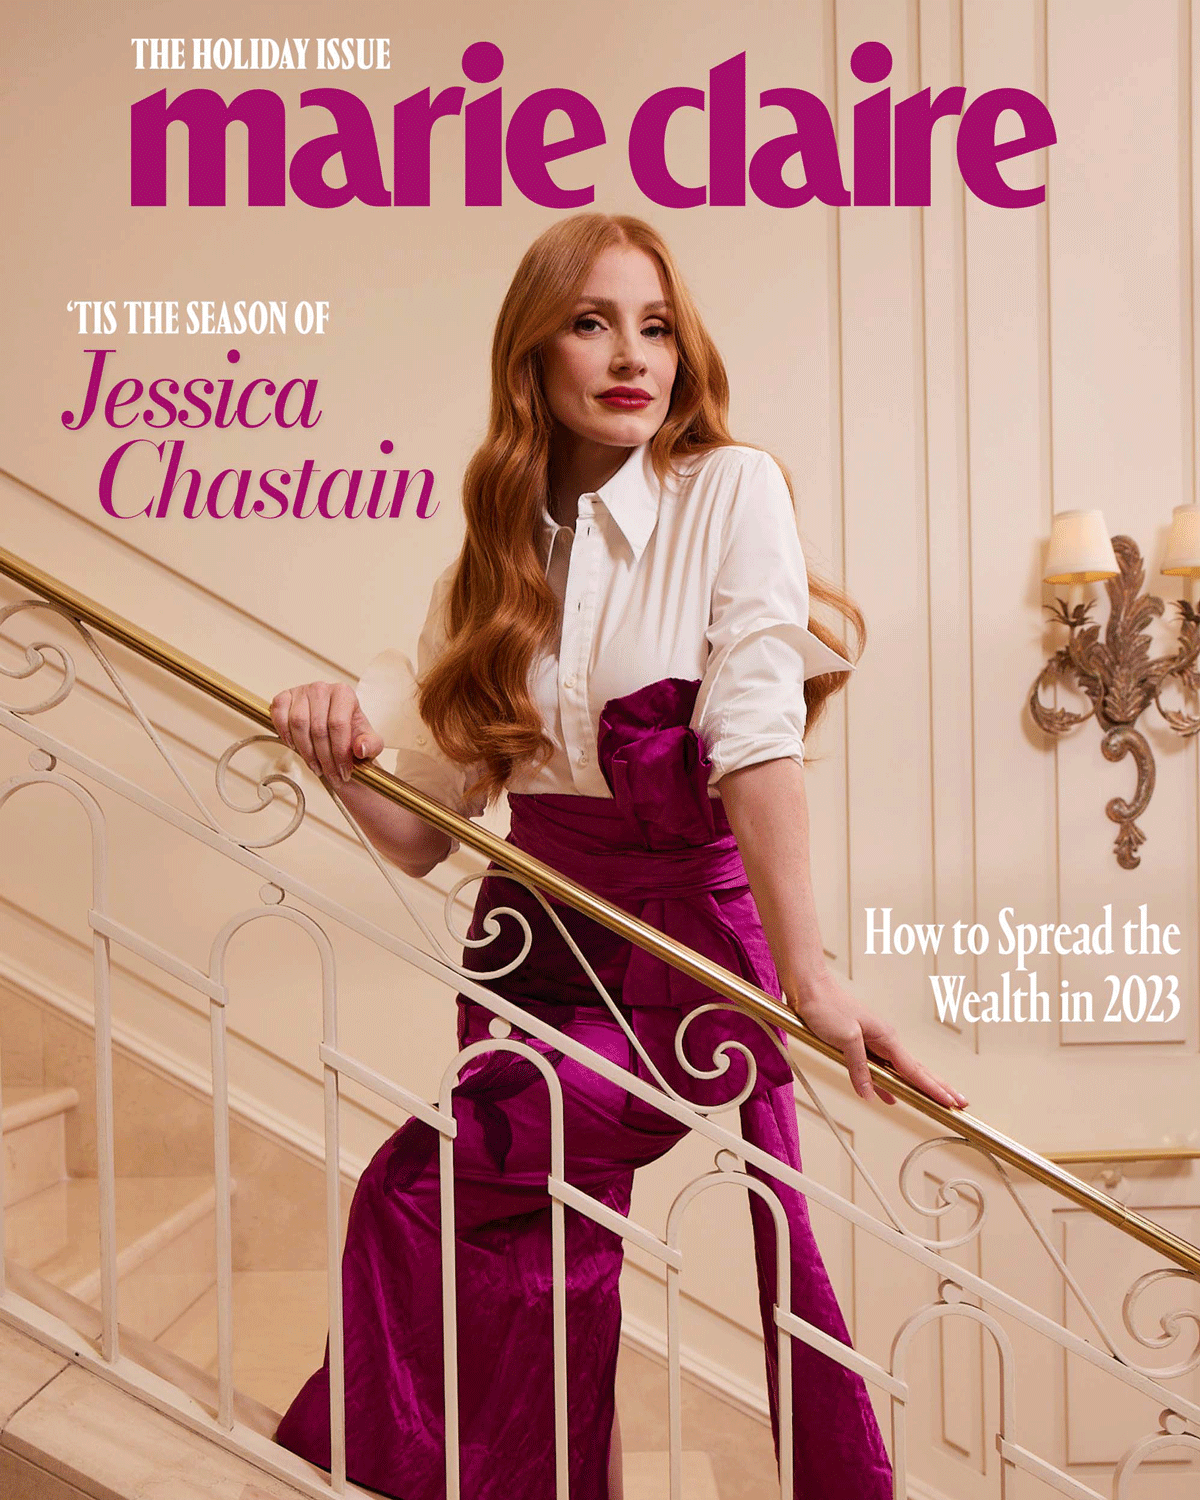 Jessica Chastain on the cover of Marie Claire's digital Holiday issue